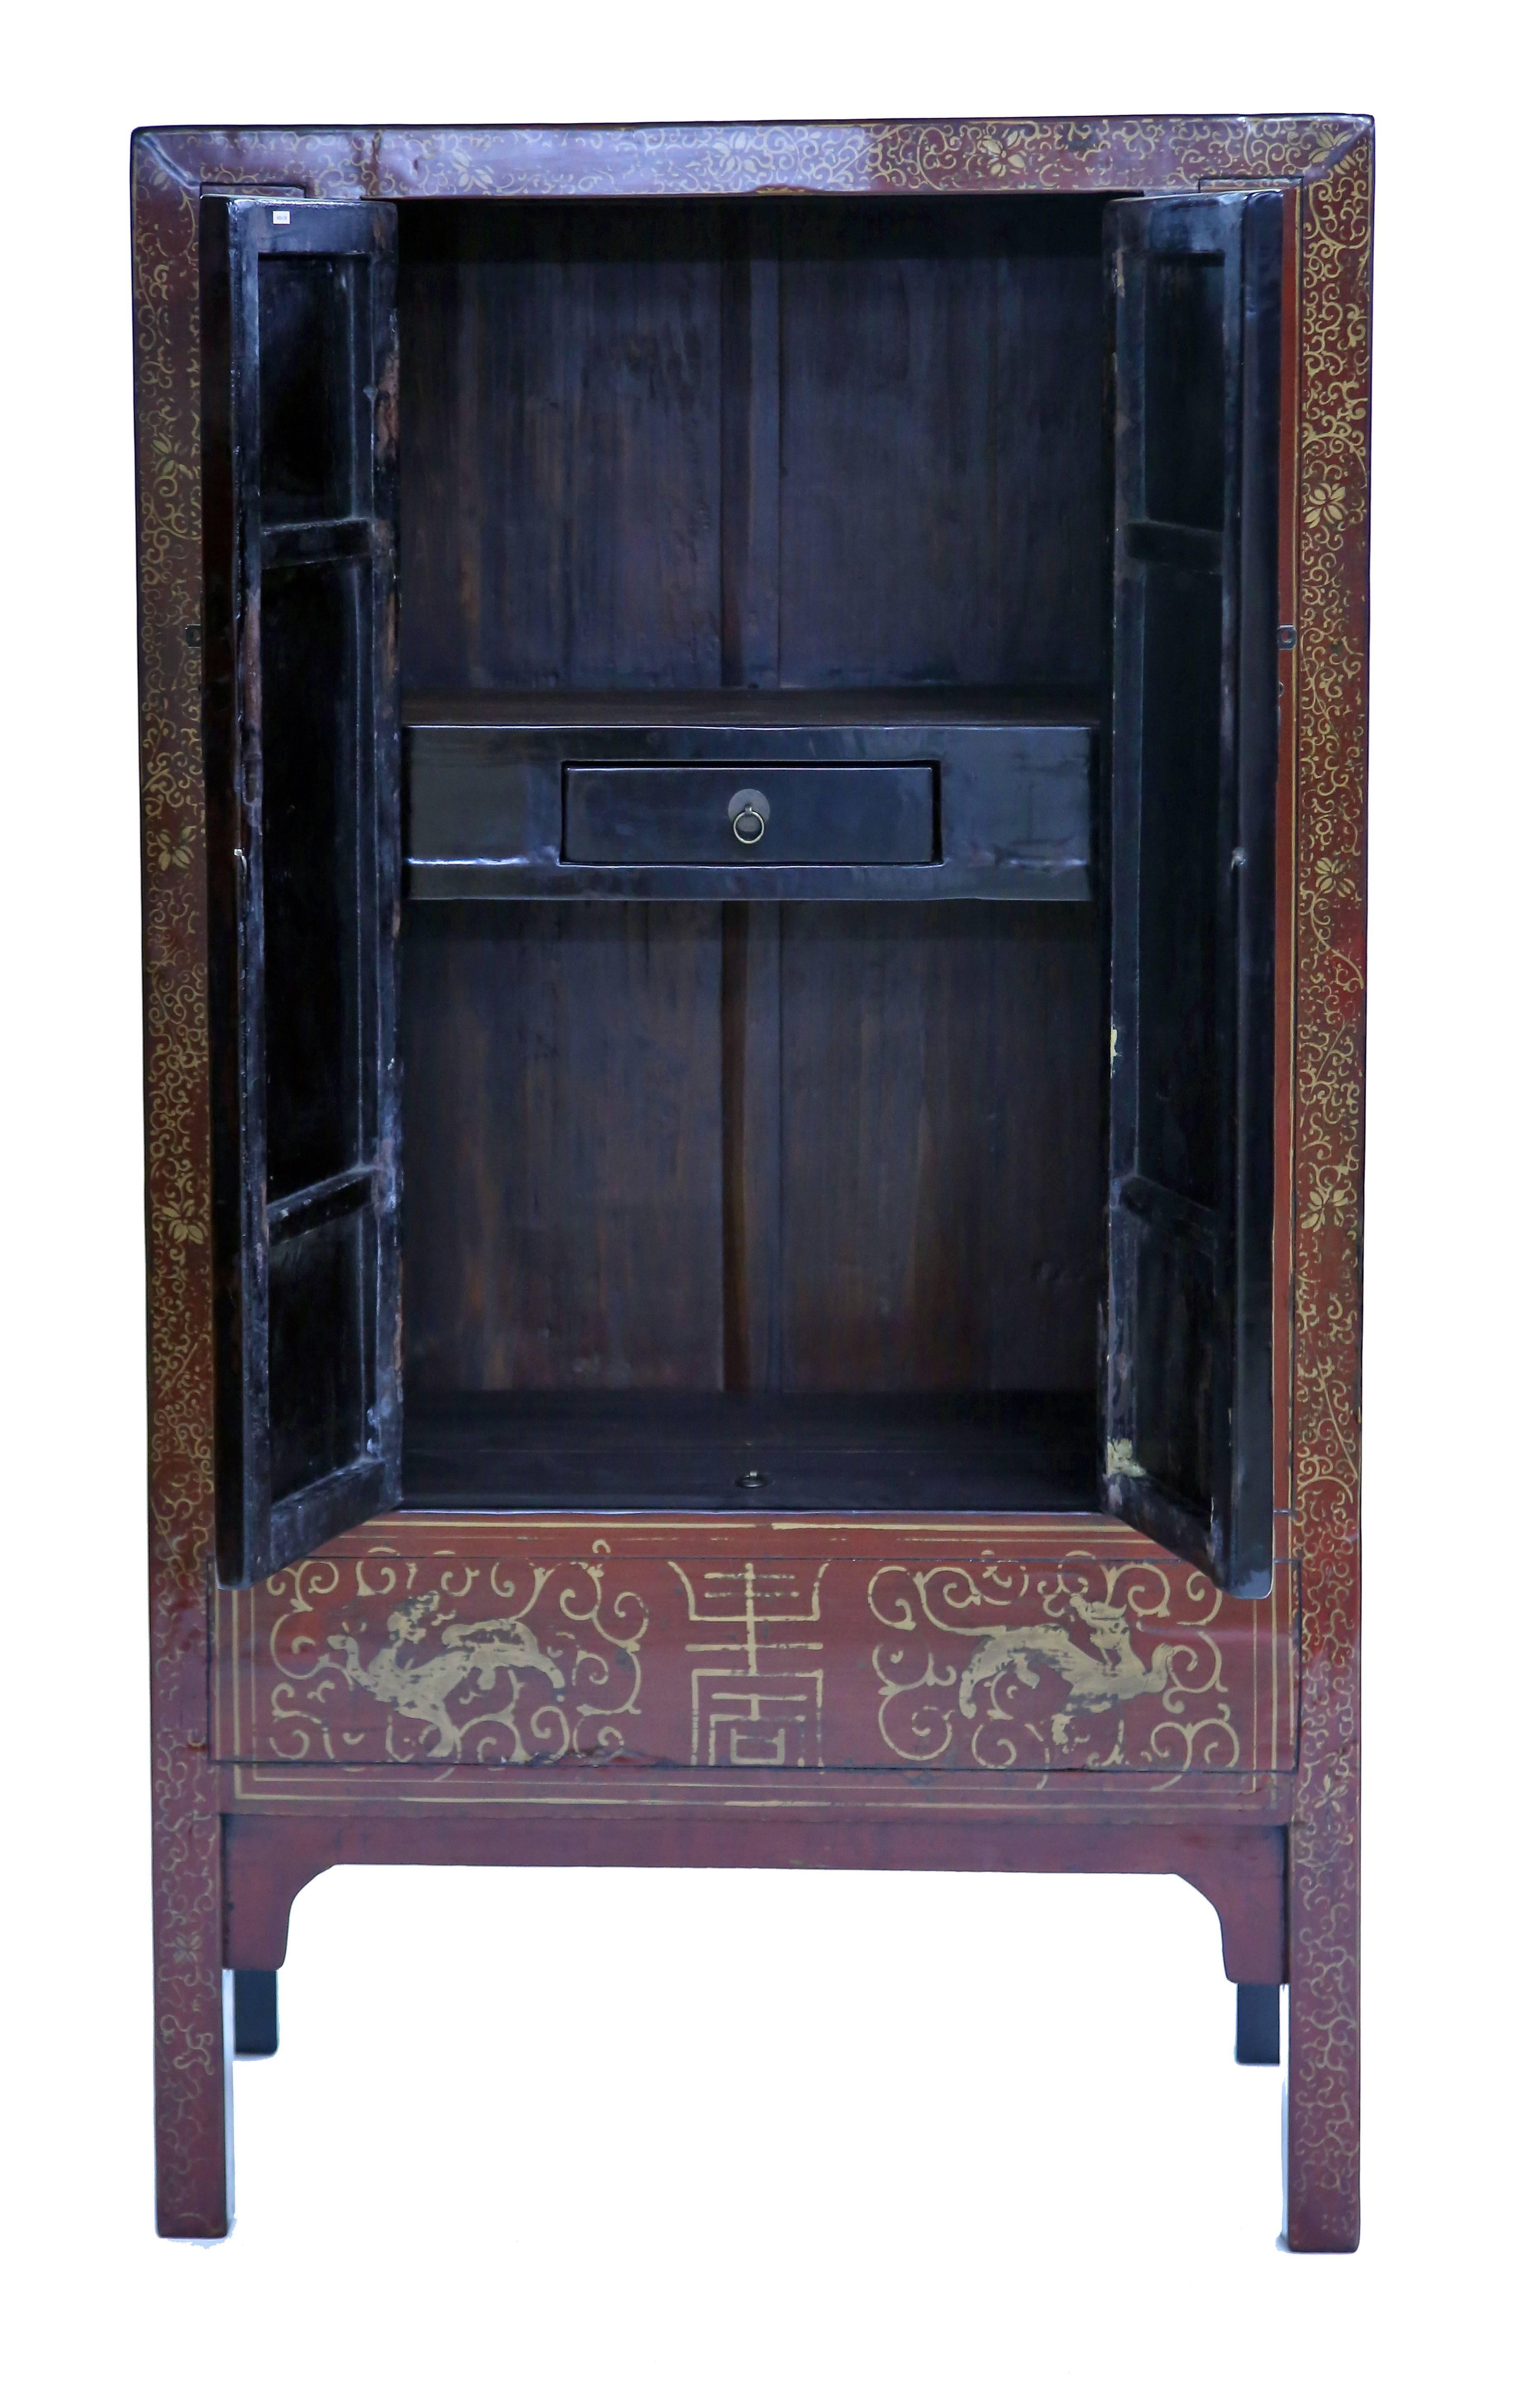 Softwood Antique Red Lacquer Gilt Painted Chinese Compound Cabinet, Scholastic Art